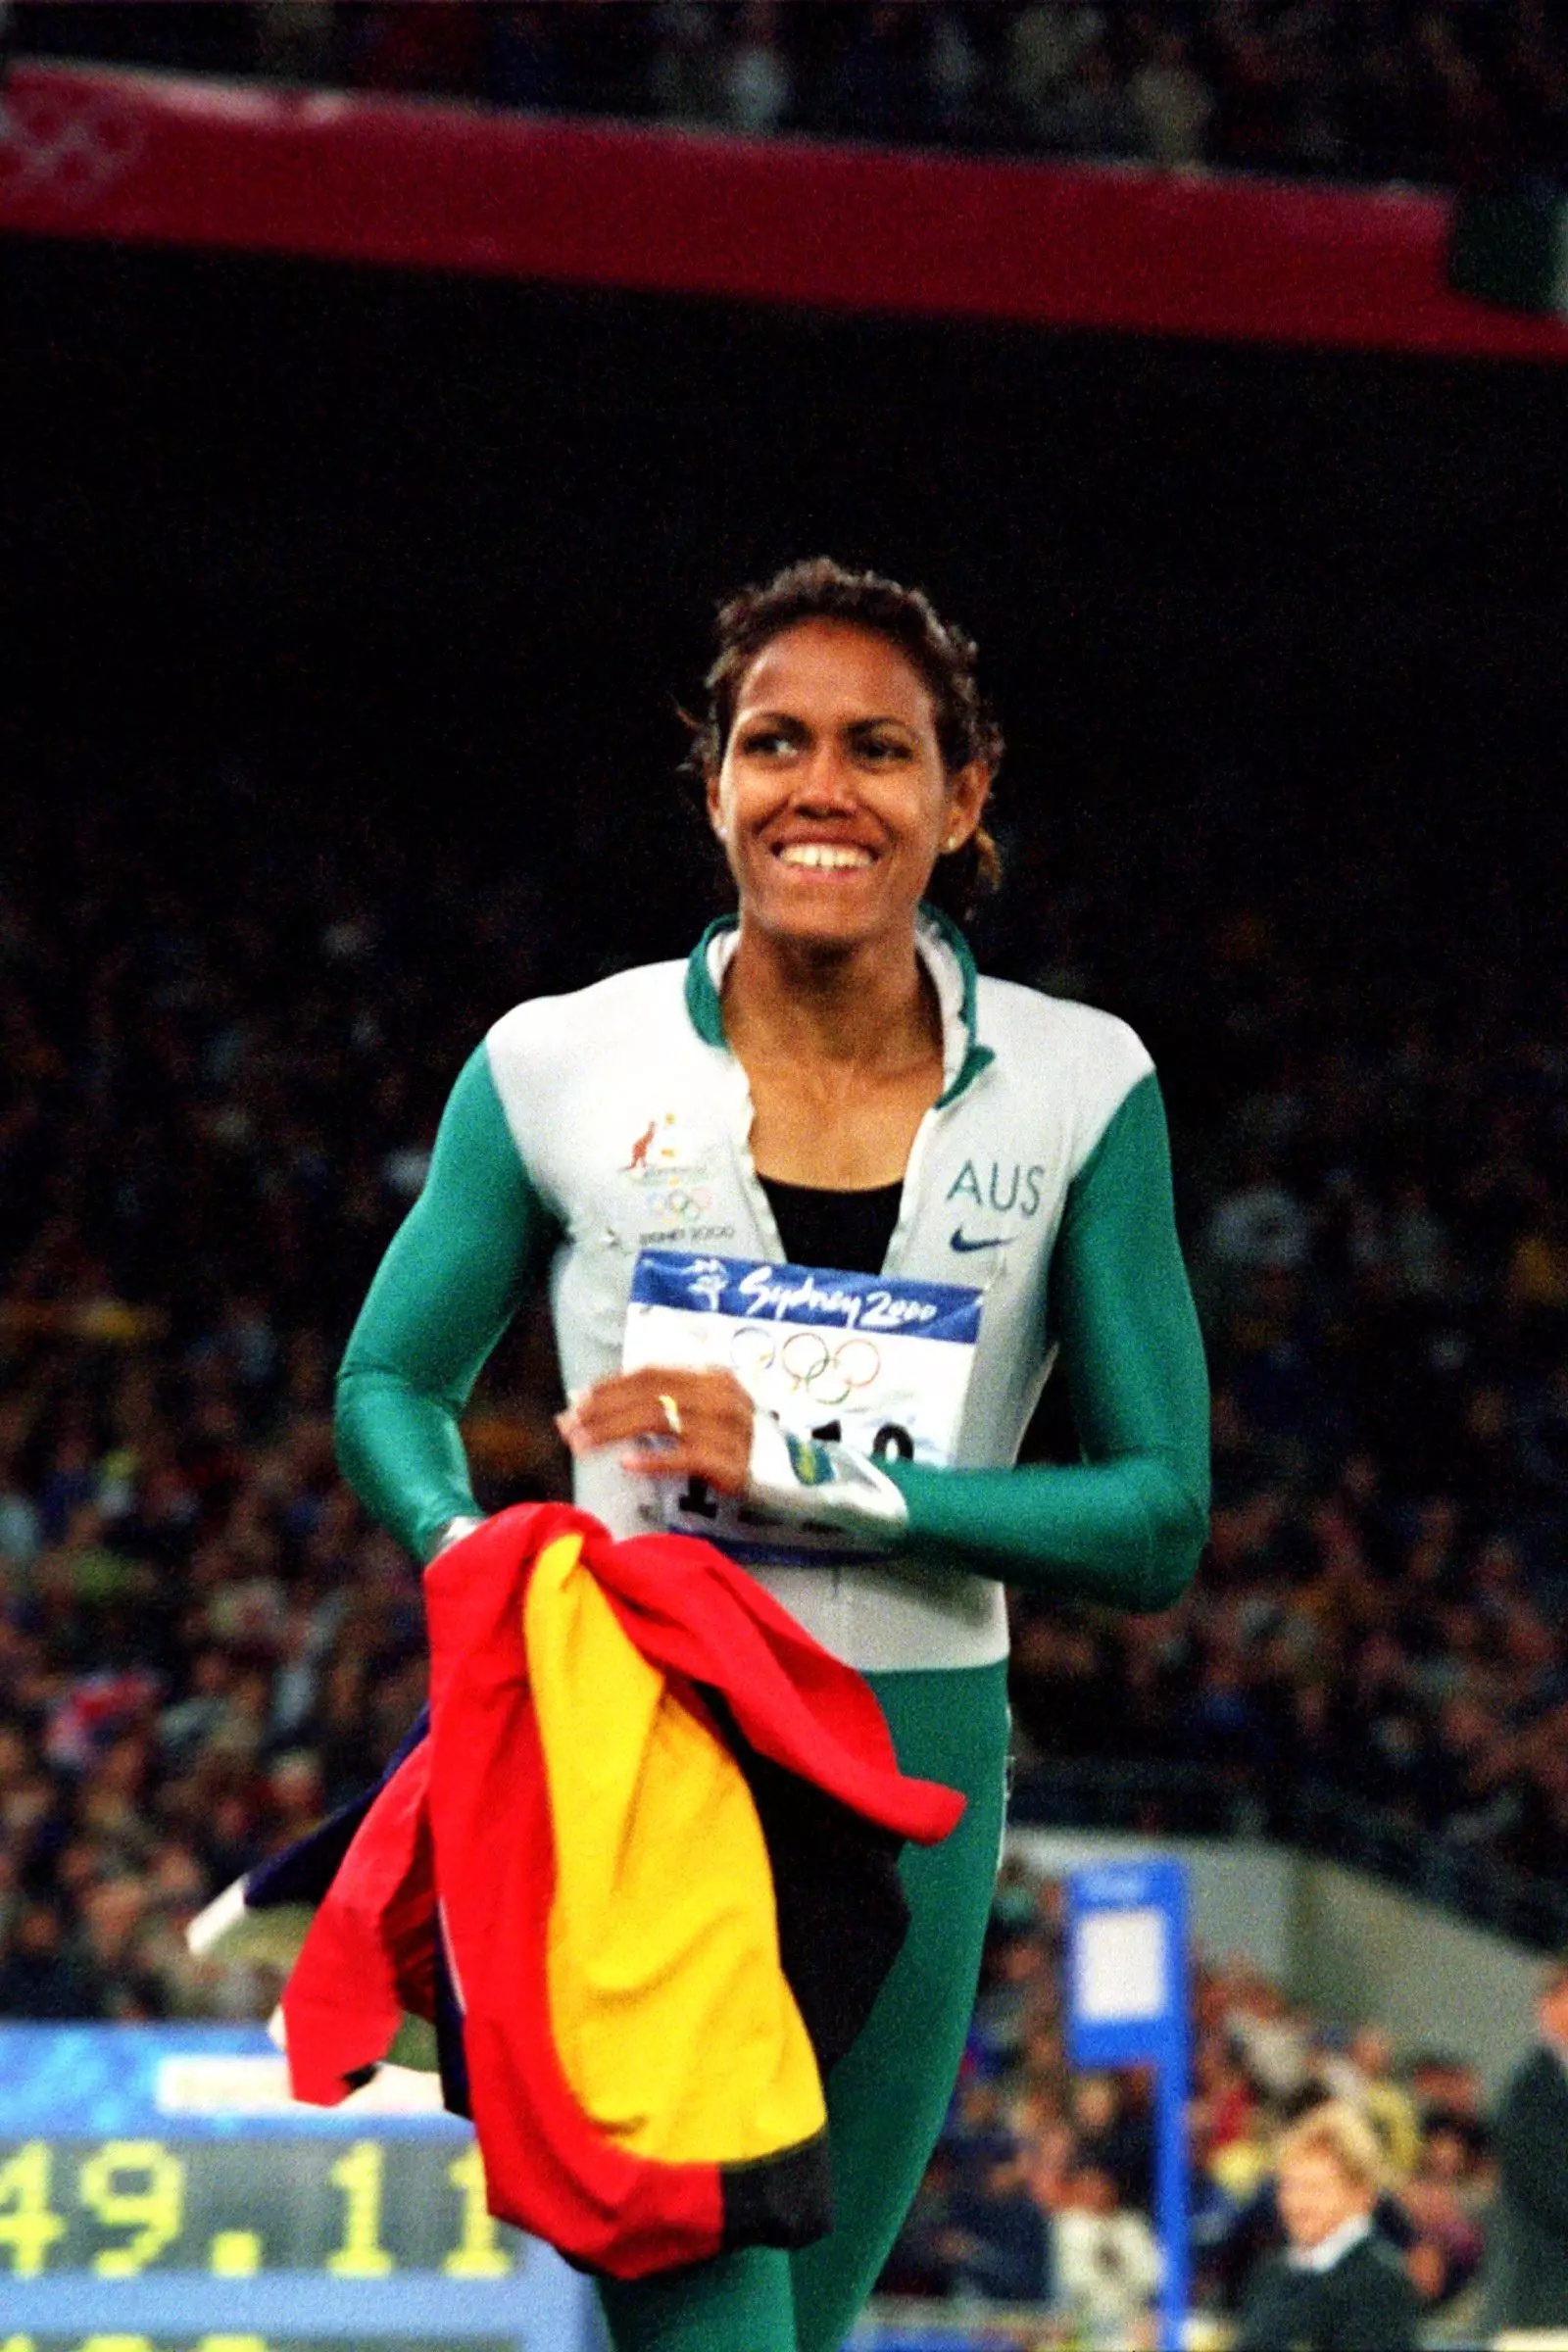 Cathy Freeman carved her name into the Olympic history books in front of packed Sydney crowd.